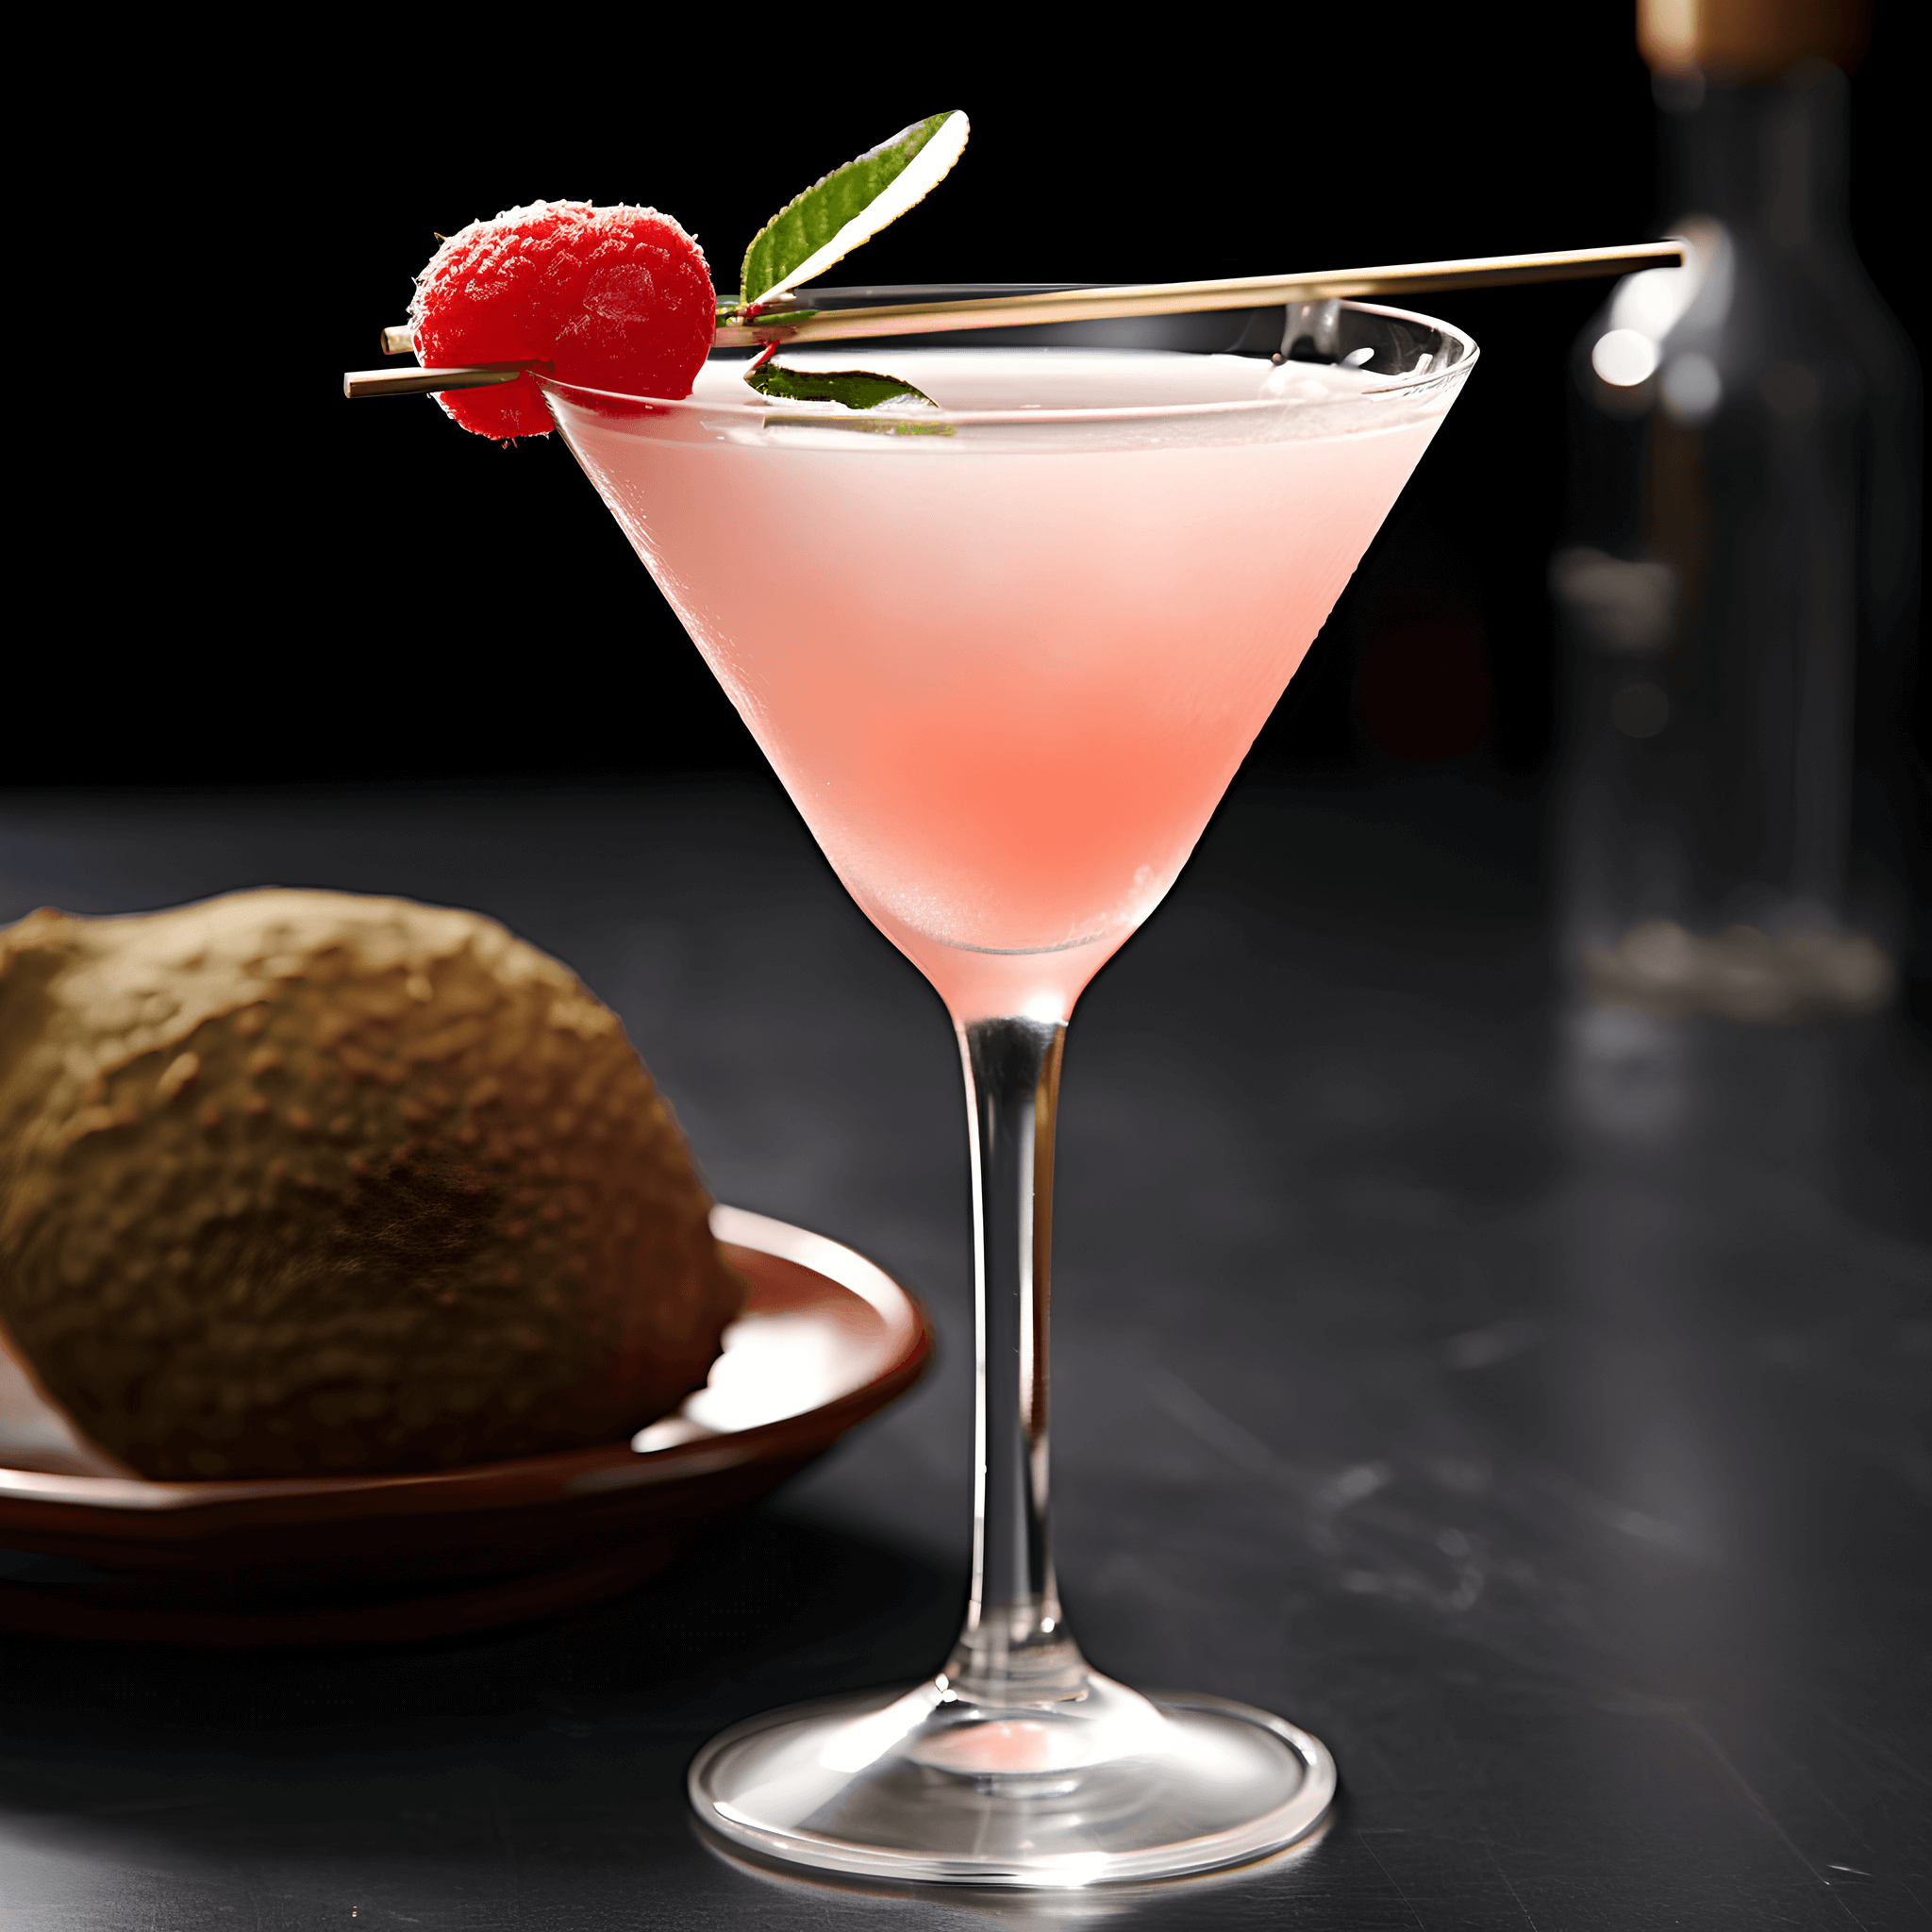 Forget Old Boring Martini - This Cocktail With Save Your Friday - The Lychee Martini has a delicate, sweet, and slightly floral taste with a hint of tartness. The lychee fruit adds a unique and exotic flavor, while the vodka provides a smooth and clean finish.